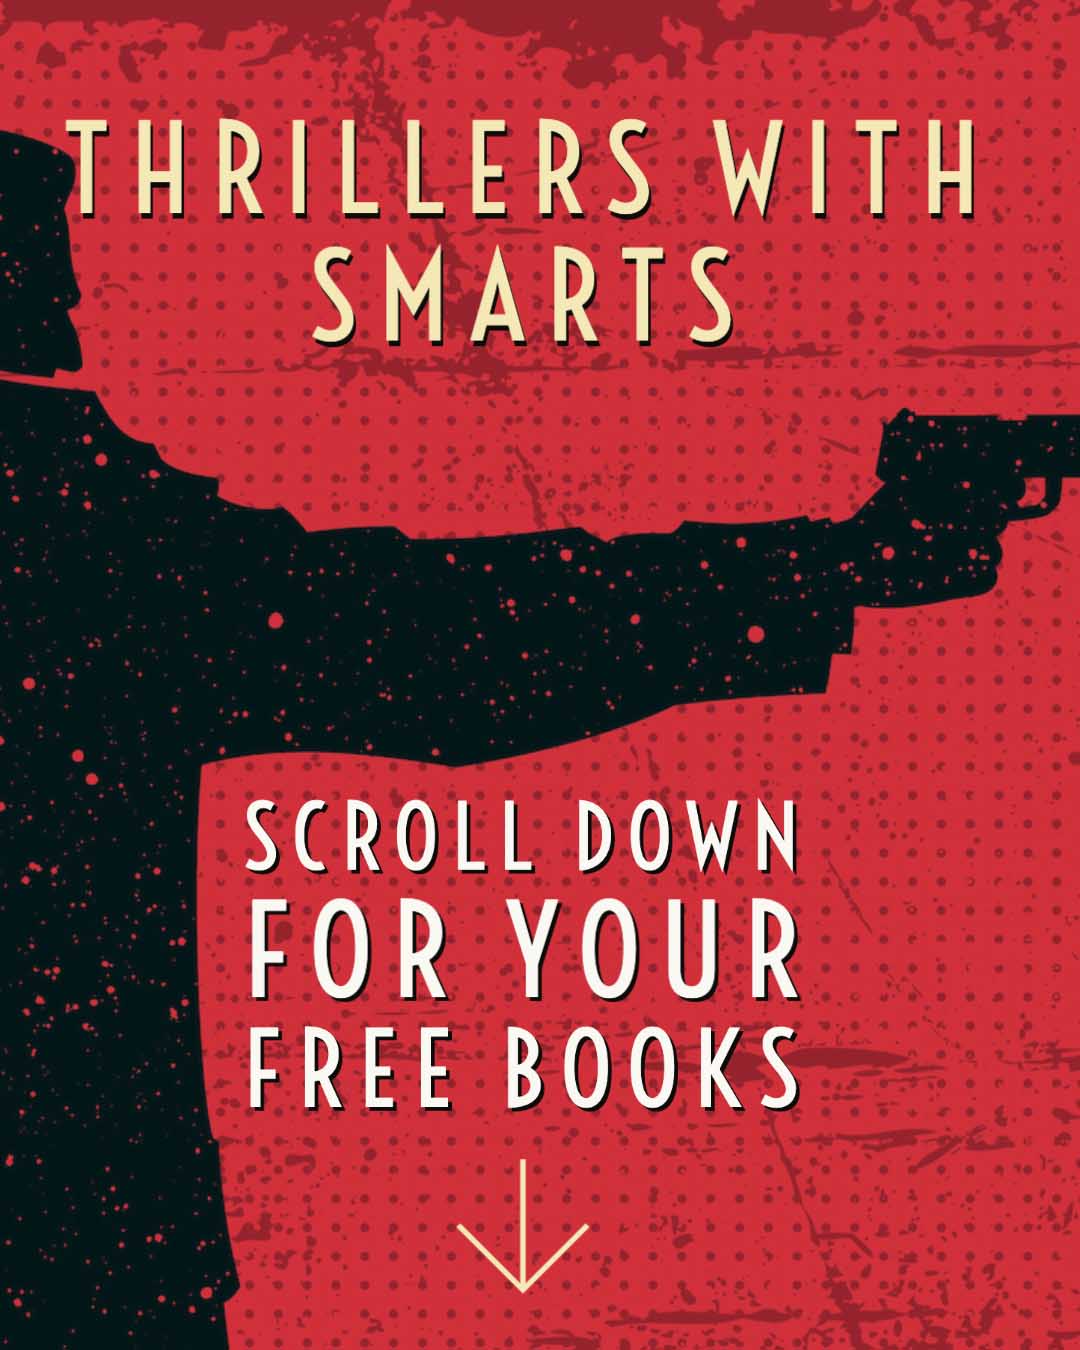 thrillers with smarts - jim heskett